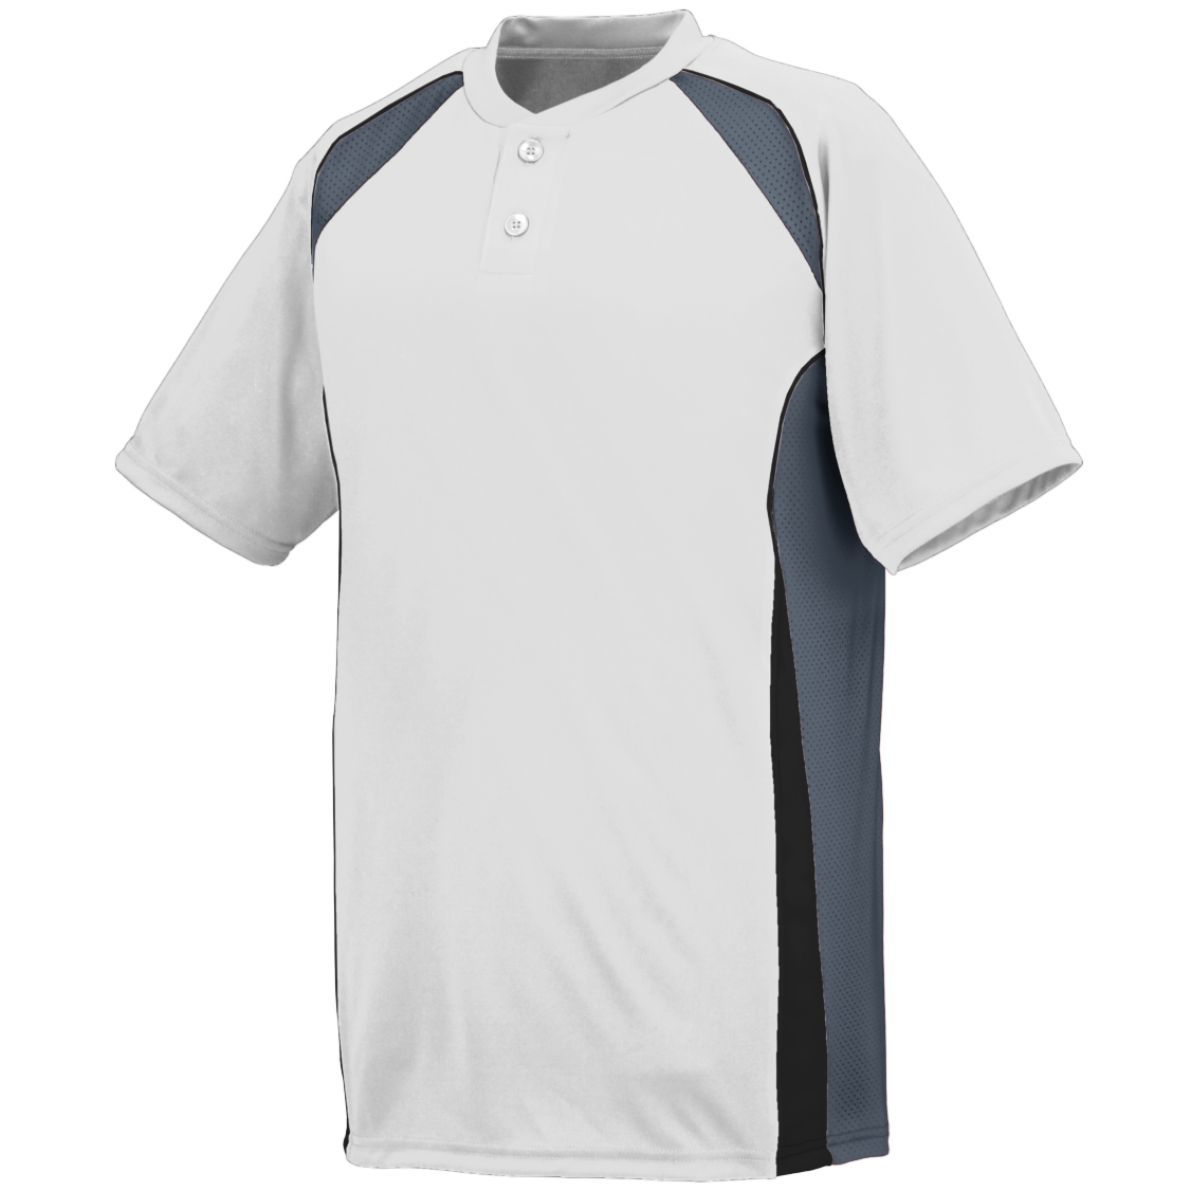 Augusta Sportswear Youth Base Hit Jersey in White/Graphite/Black  -Part of the Youth, Youth-Jersey, Augusta-Products, Baseball, Shirts, All-Sports, All-Sports-1 product lines at KanaleyCreations.com